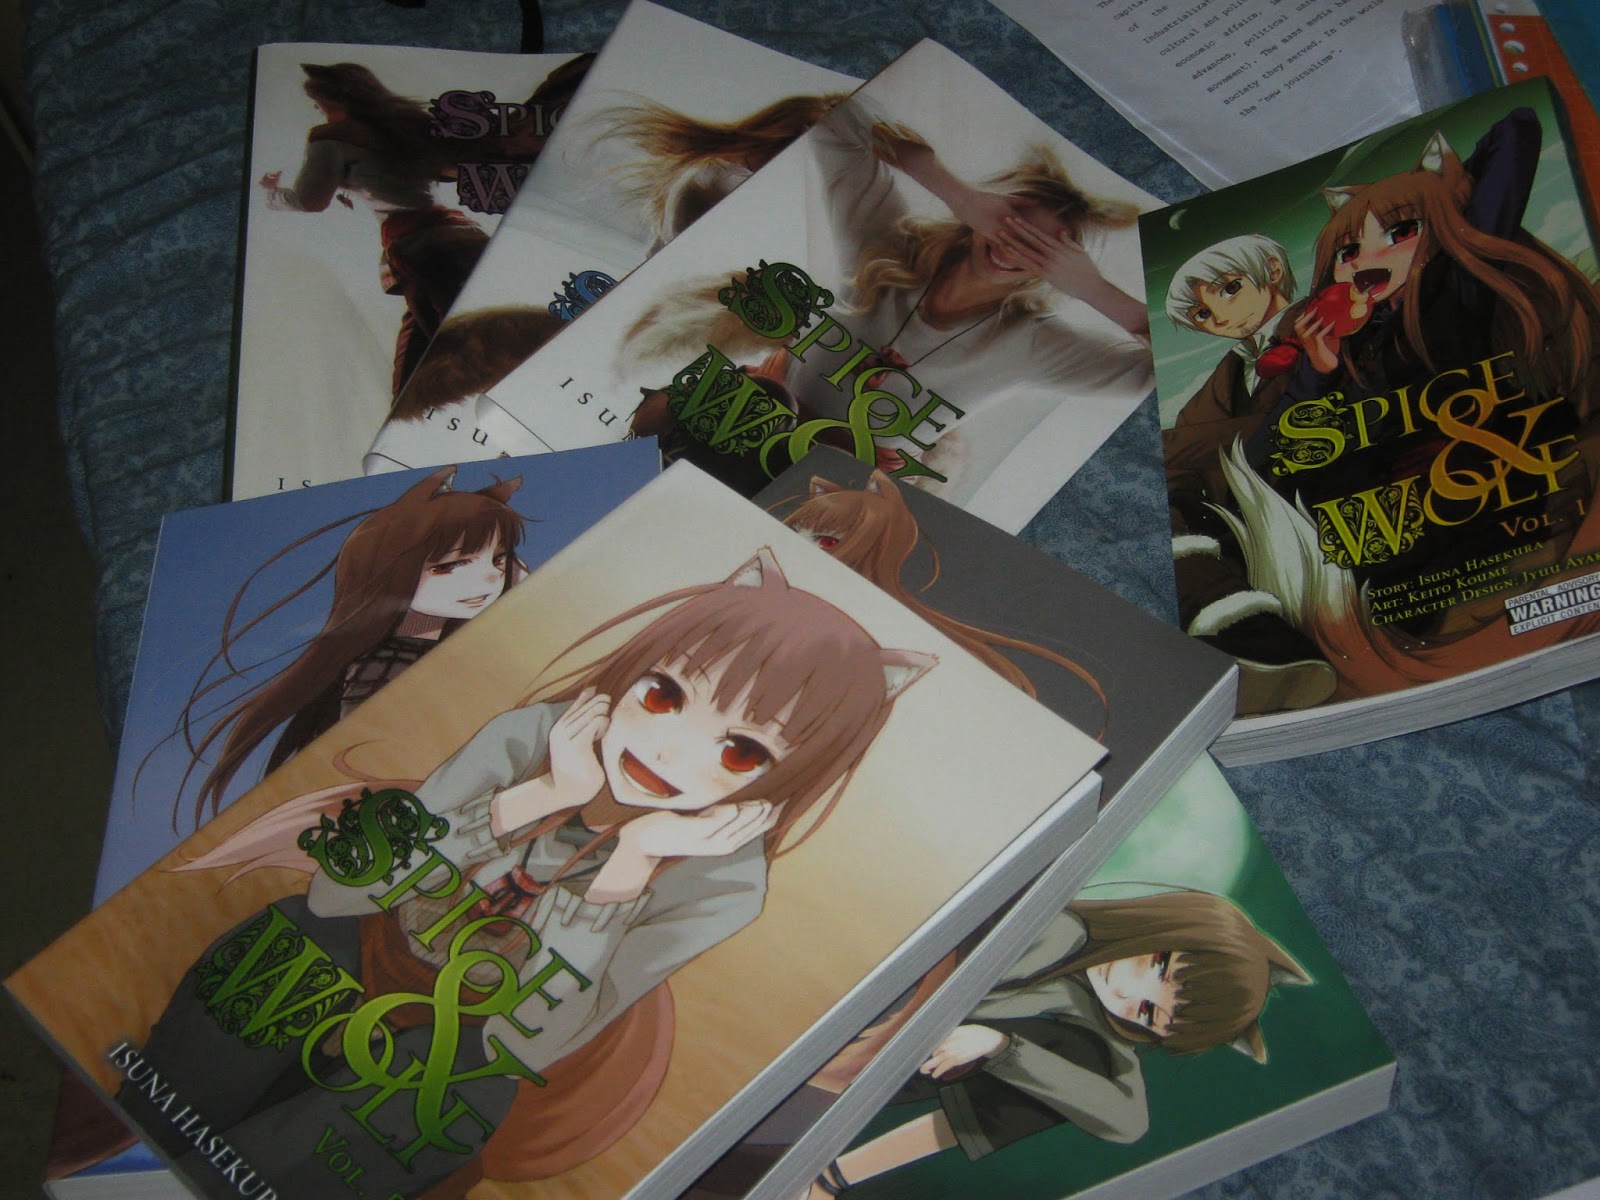 Anime, Fan Fiction and Books. Oh My!: Spice and Wolf, Volume 5